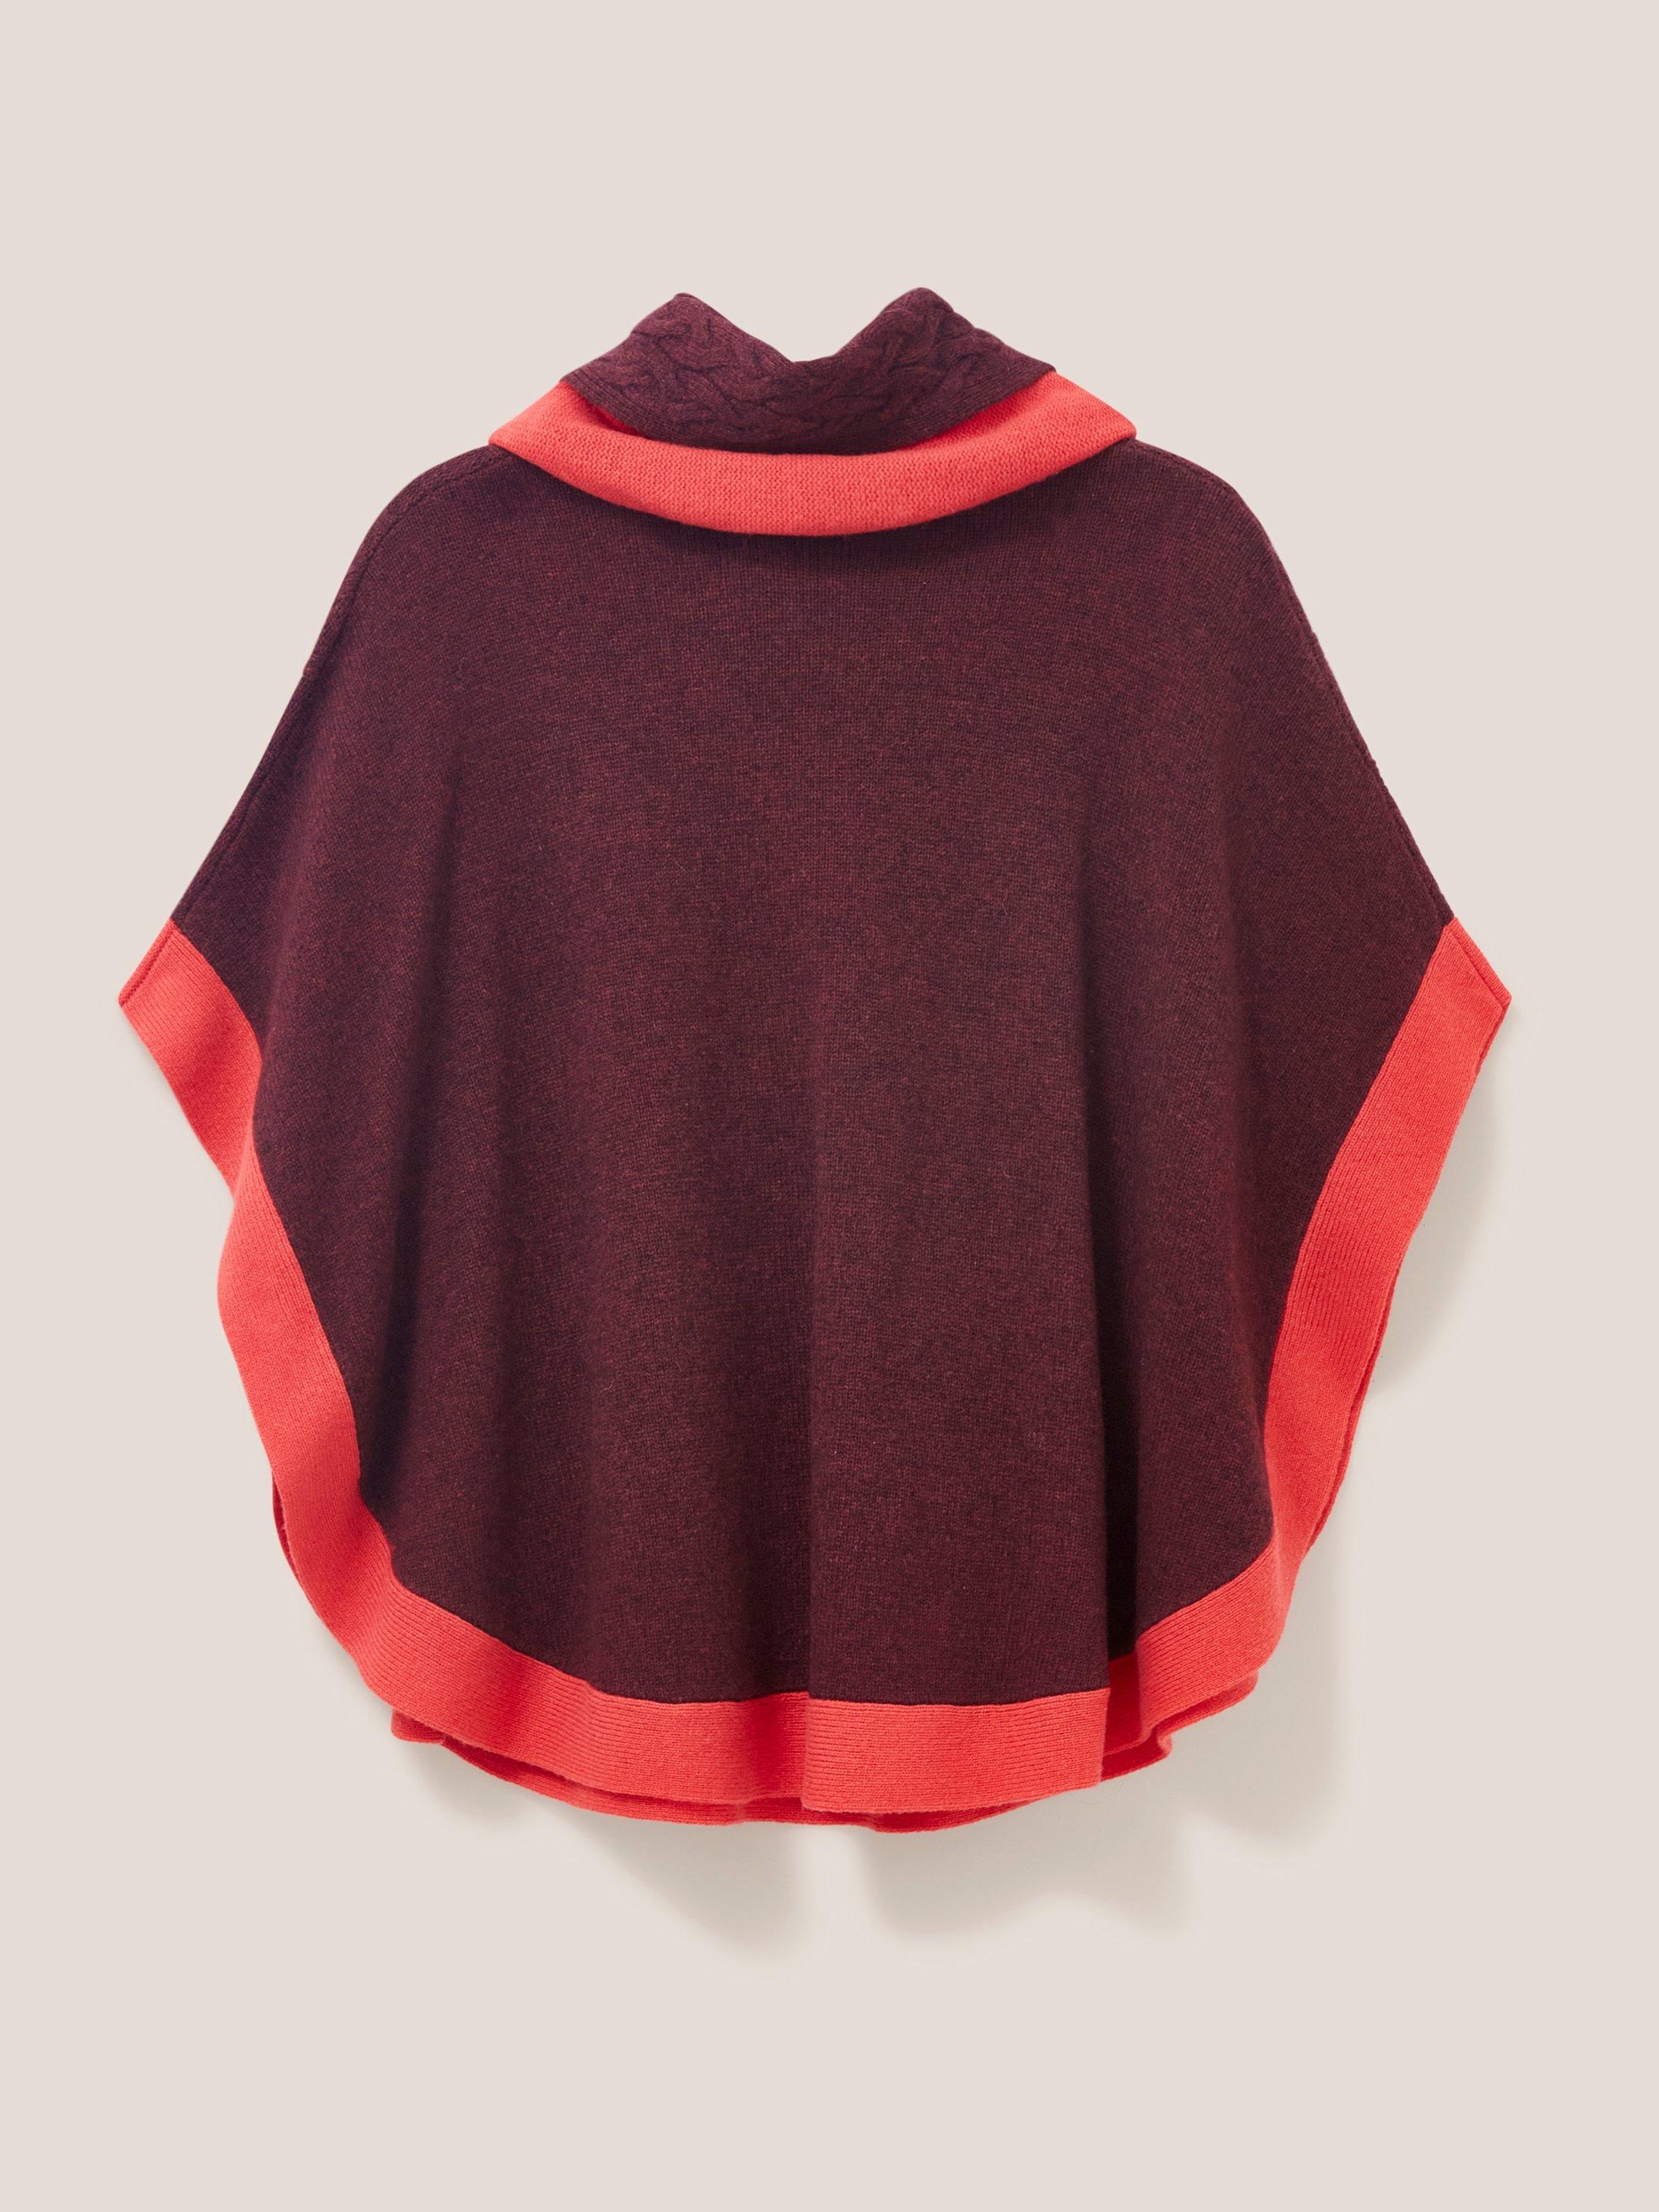 Fern Knitted Casual Poncho in MID PLUM - FLAT BACK